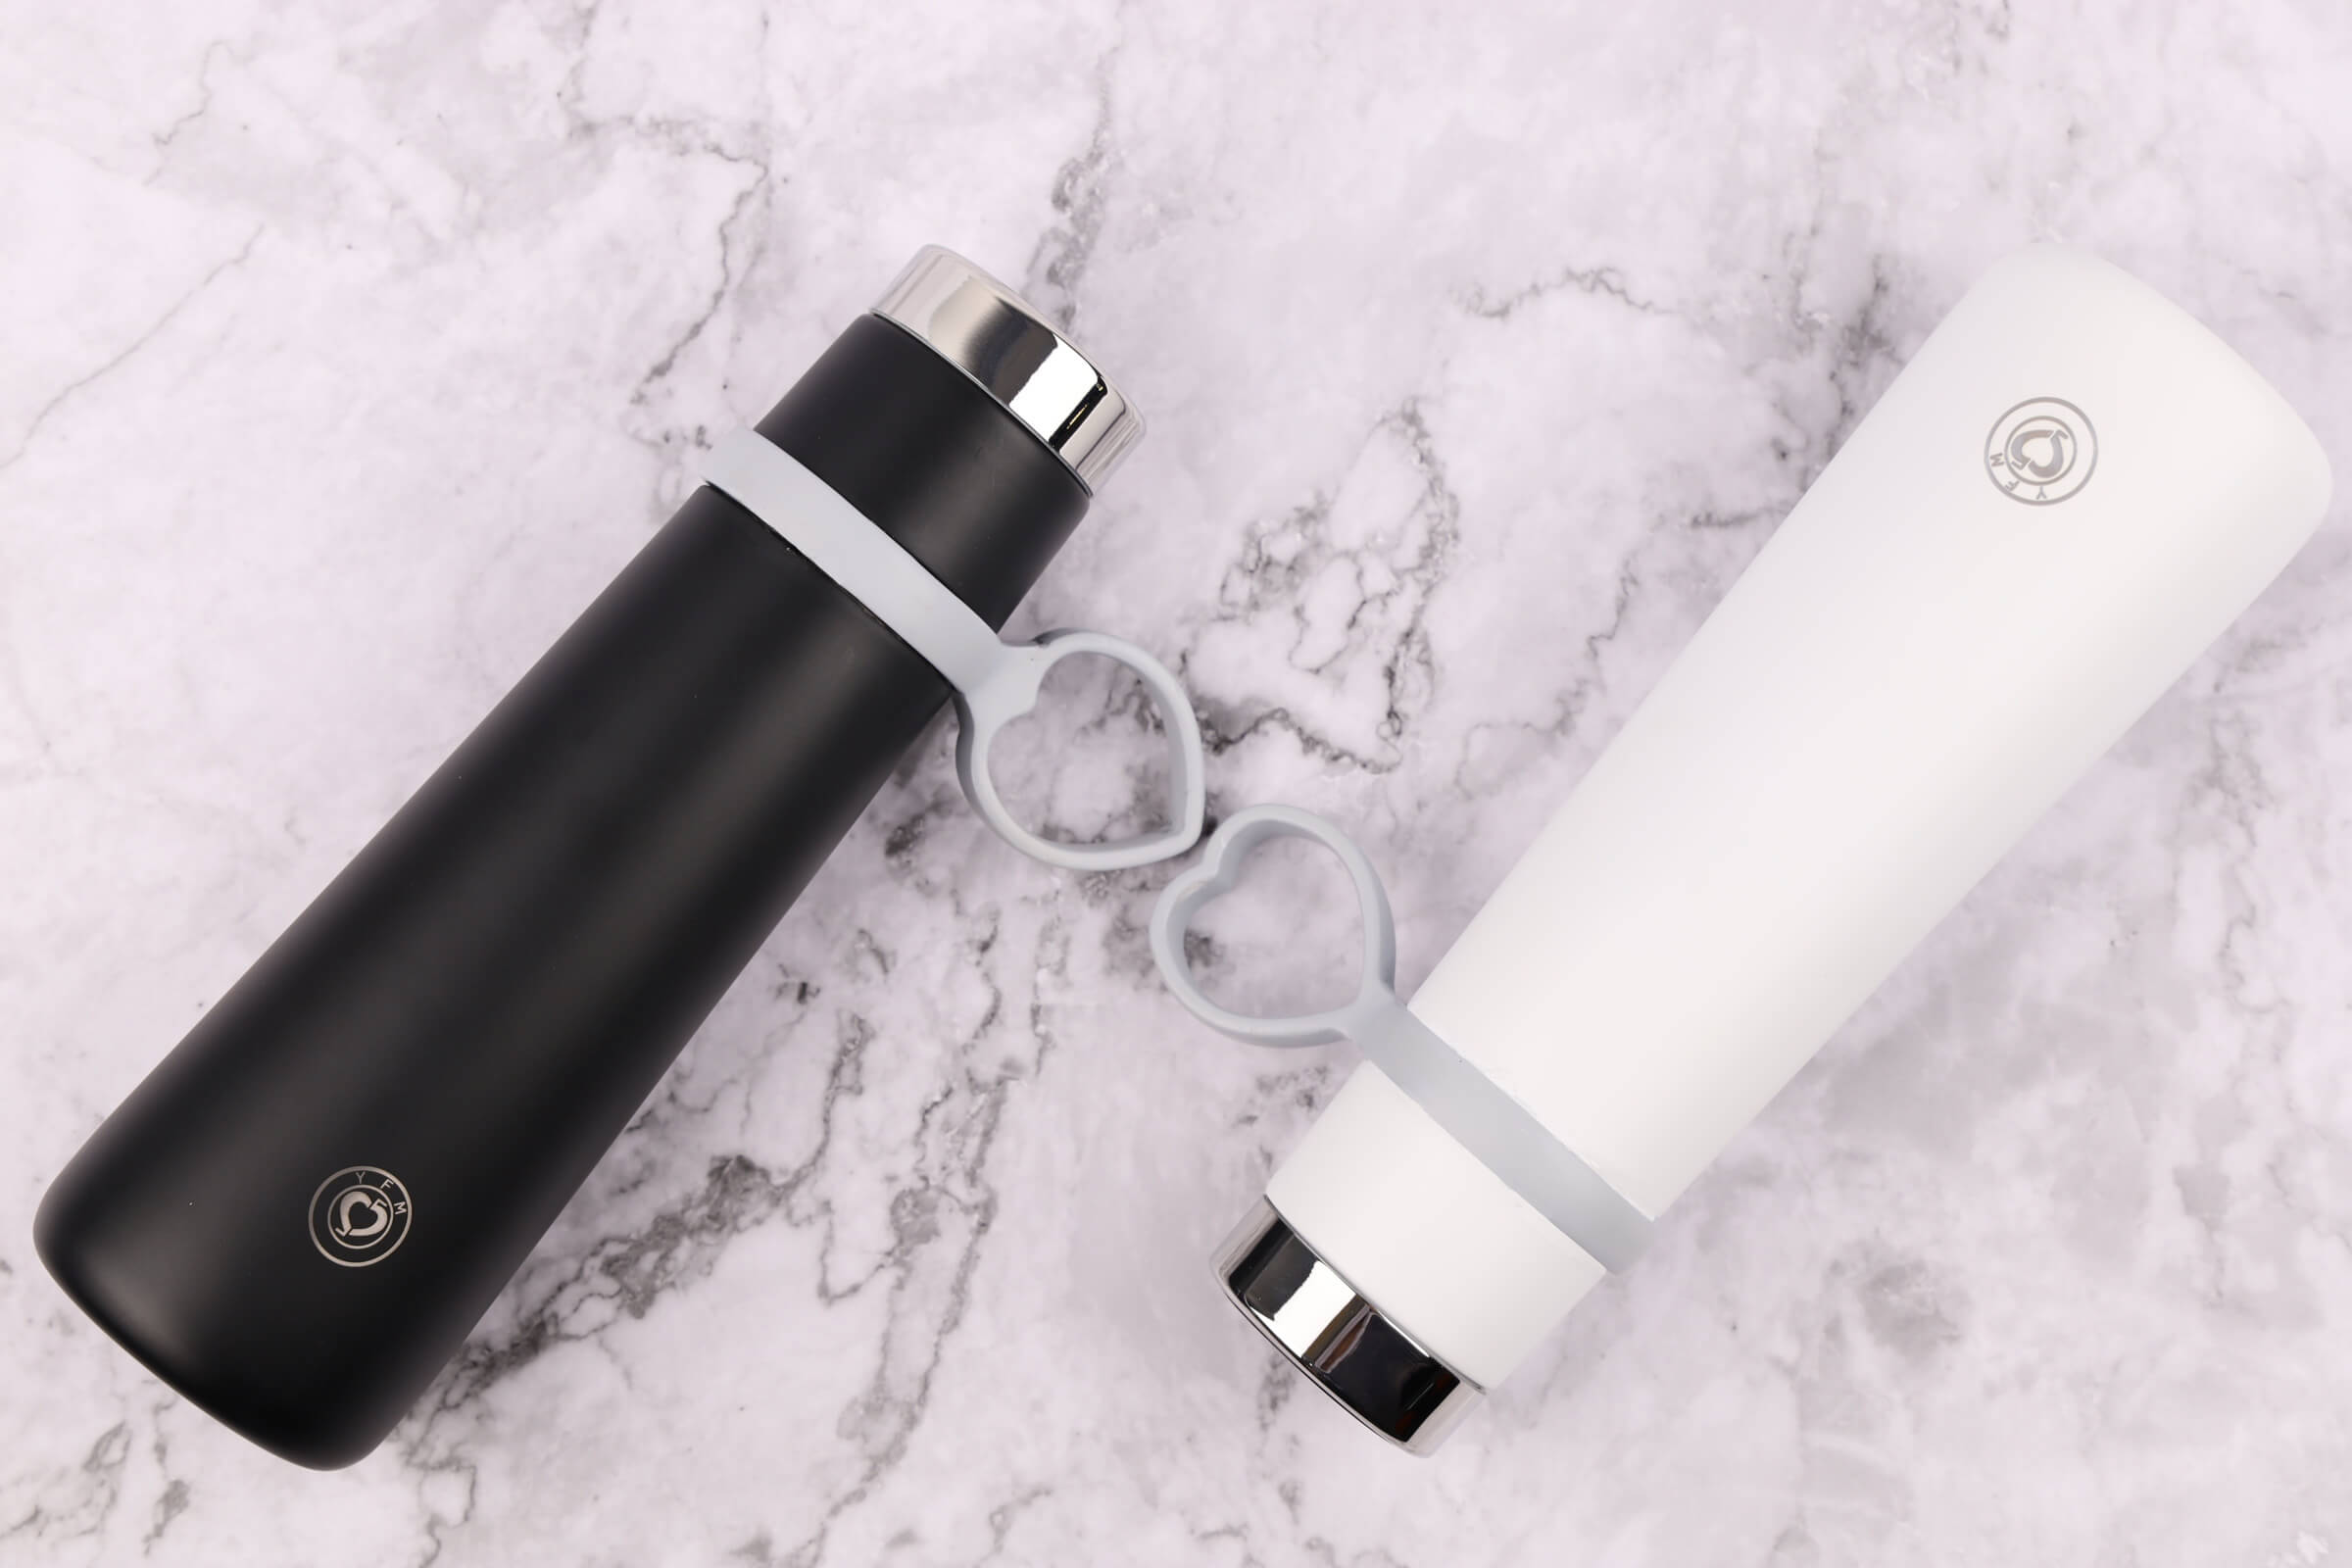  Your Reliable Travel Companion for Hydration on the Go 